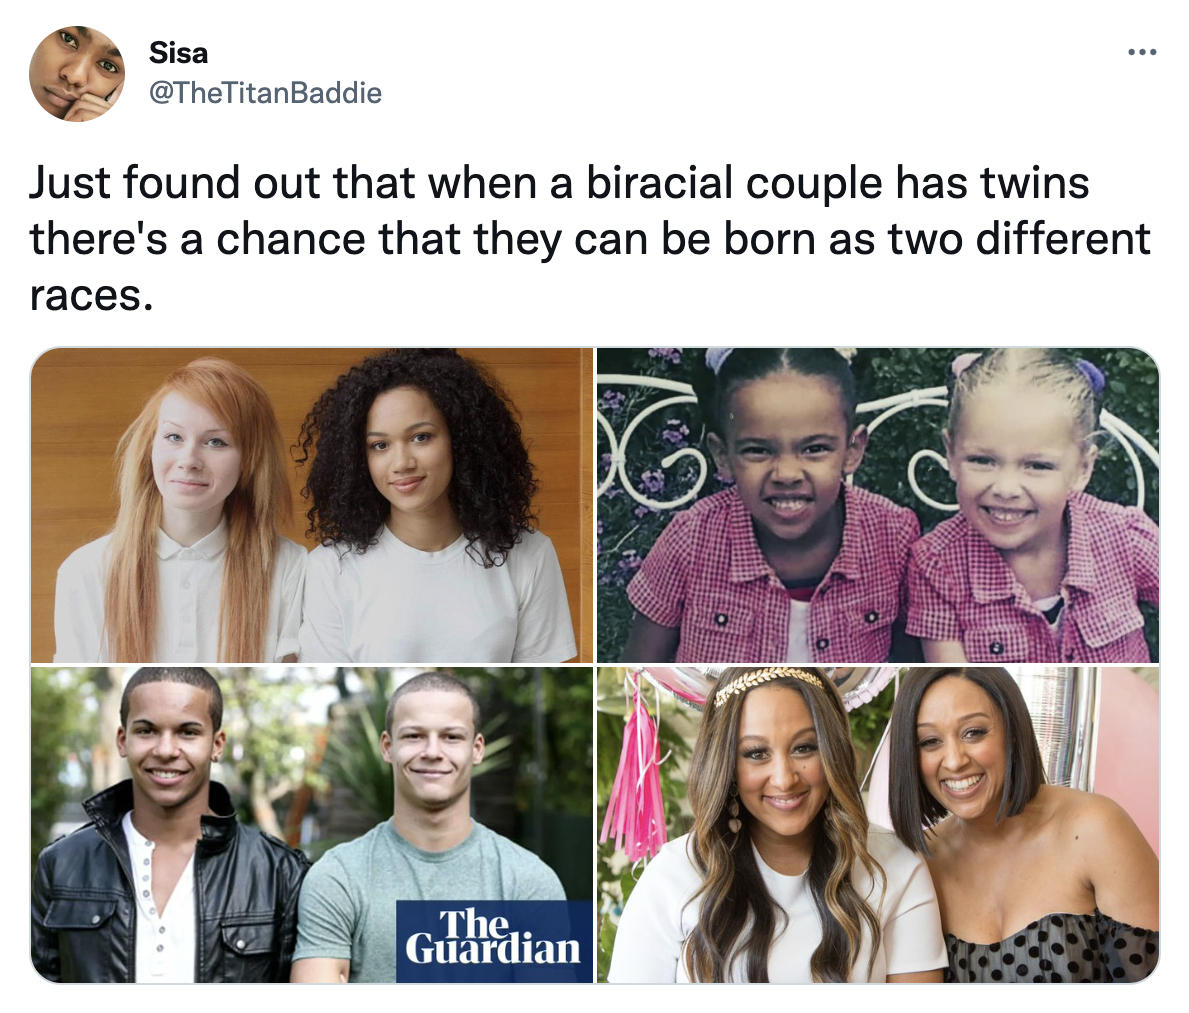 Tamera Mowry Trends on Twitter Over Joke That Biracial Couples Can Give Bir...